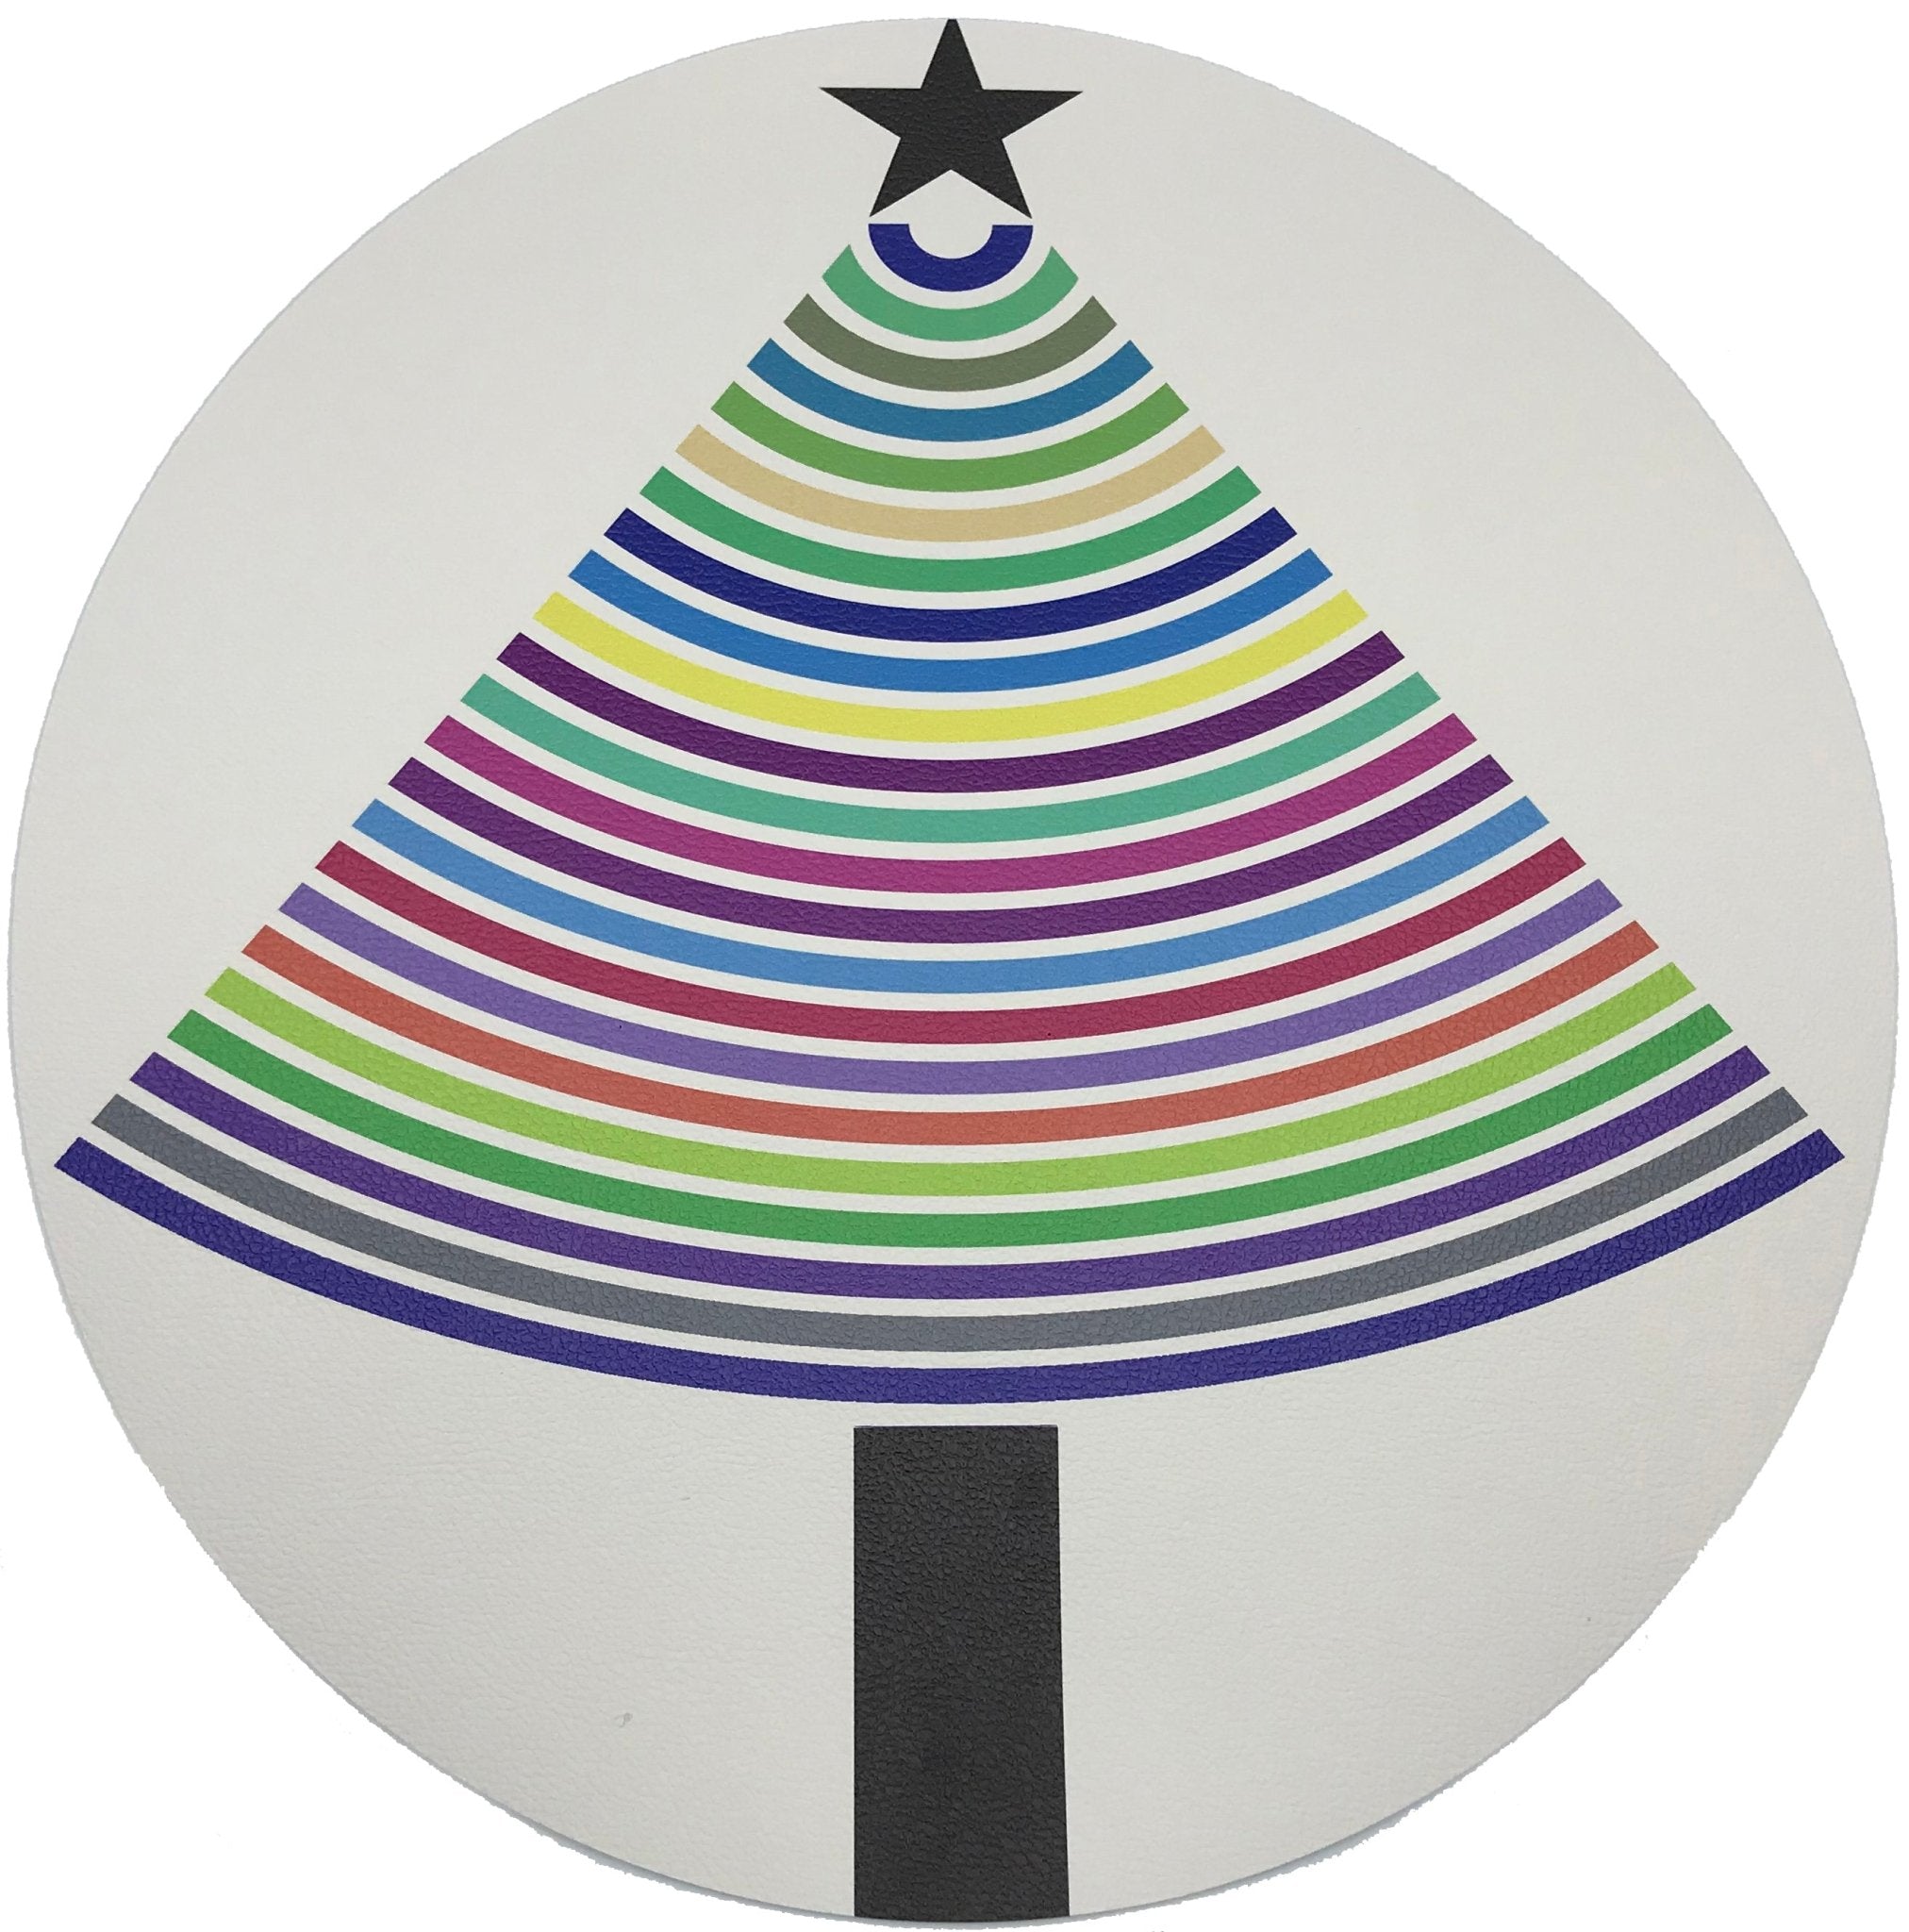 CHRISTMAS TREE BRIGHTS 16 ROUND PEBBLE PLACEMAT, SET OF 4 - nicolettemayer.com